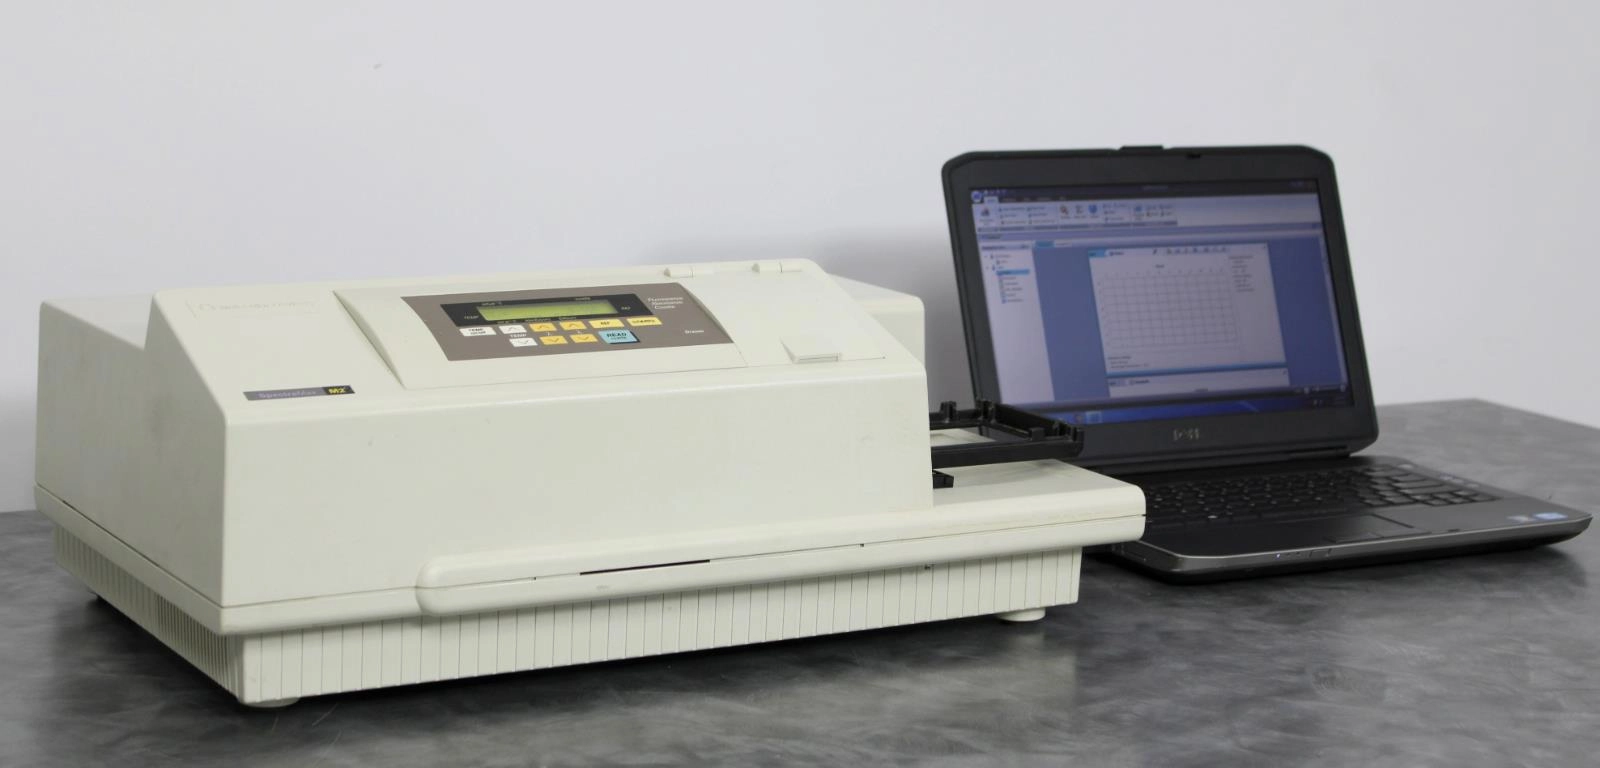 Molecular Devices SpectraMax M2e Multi-Mode Microplate Reader w/ SoftMax Pro